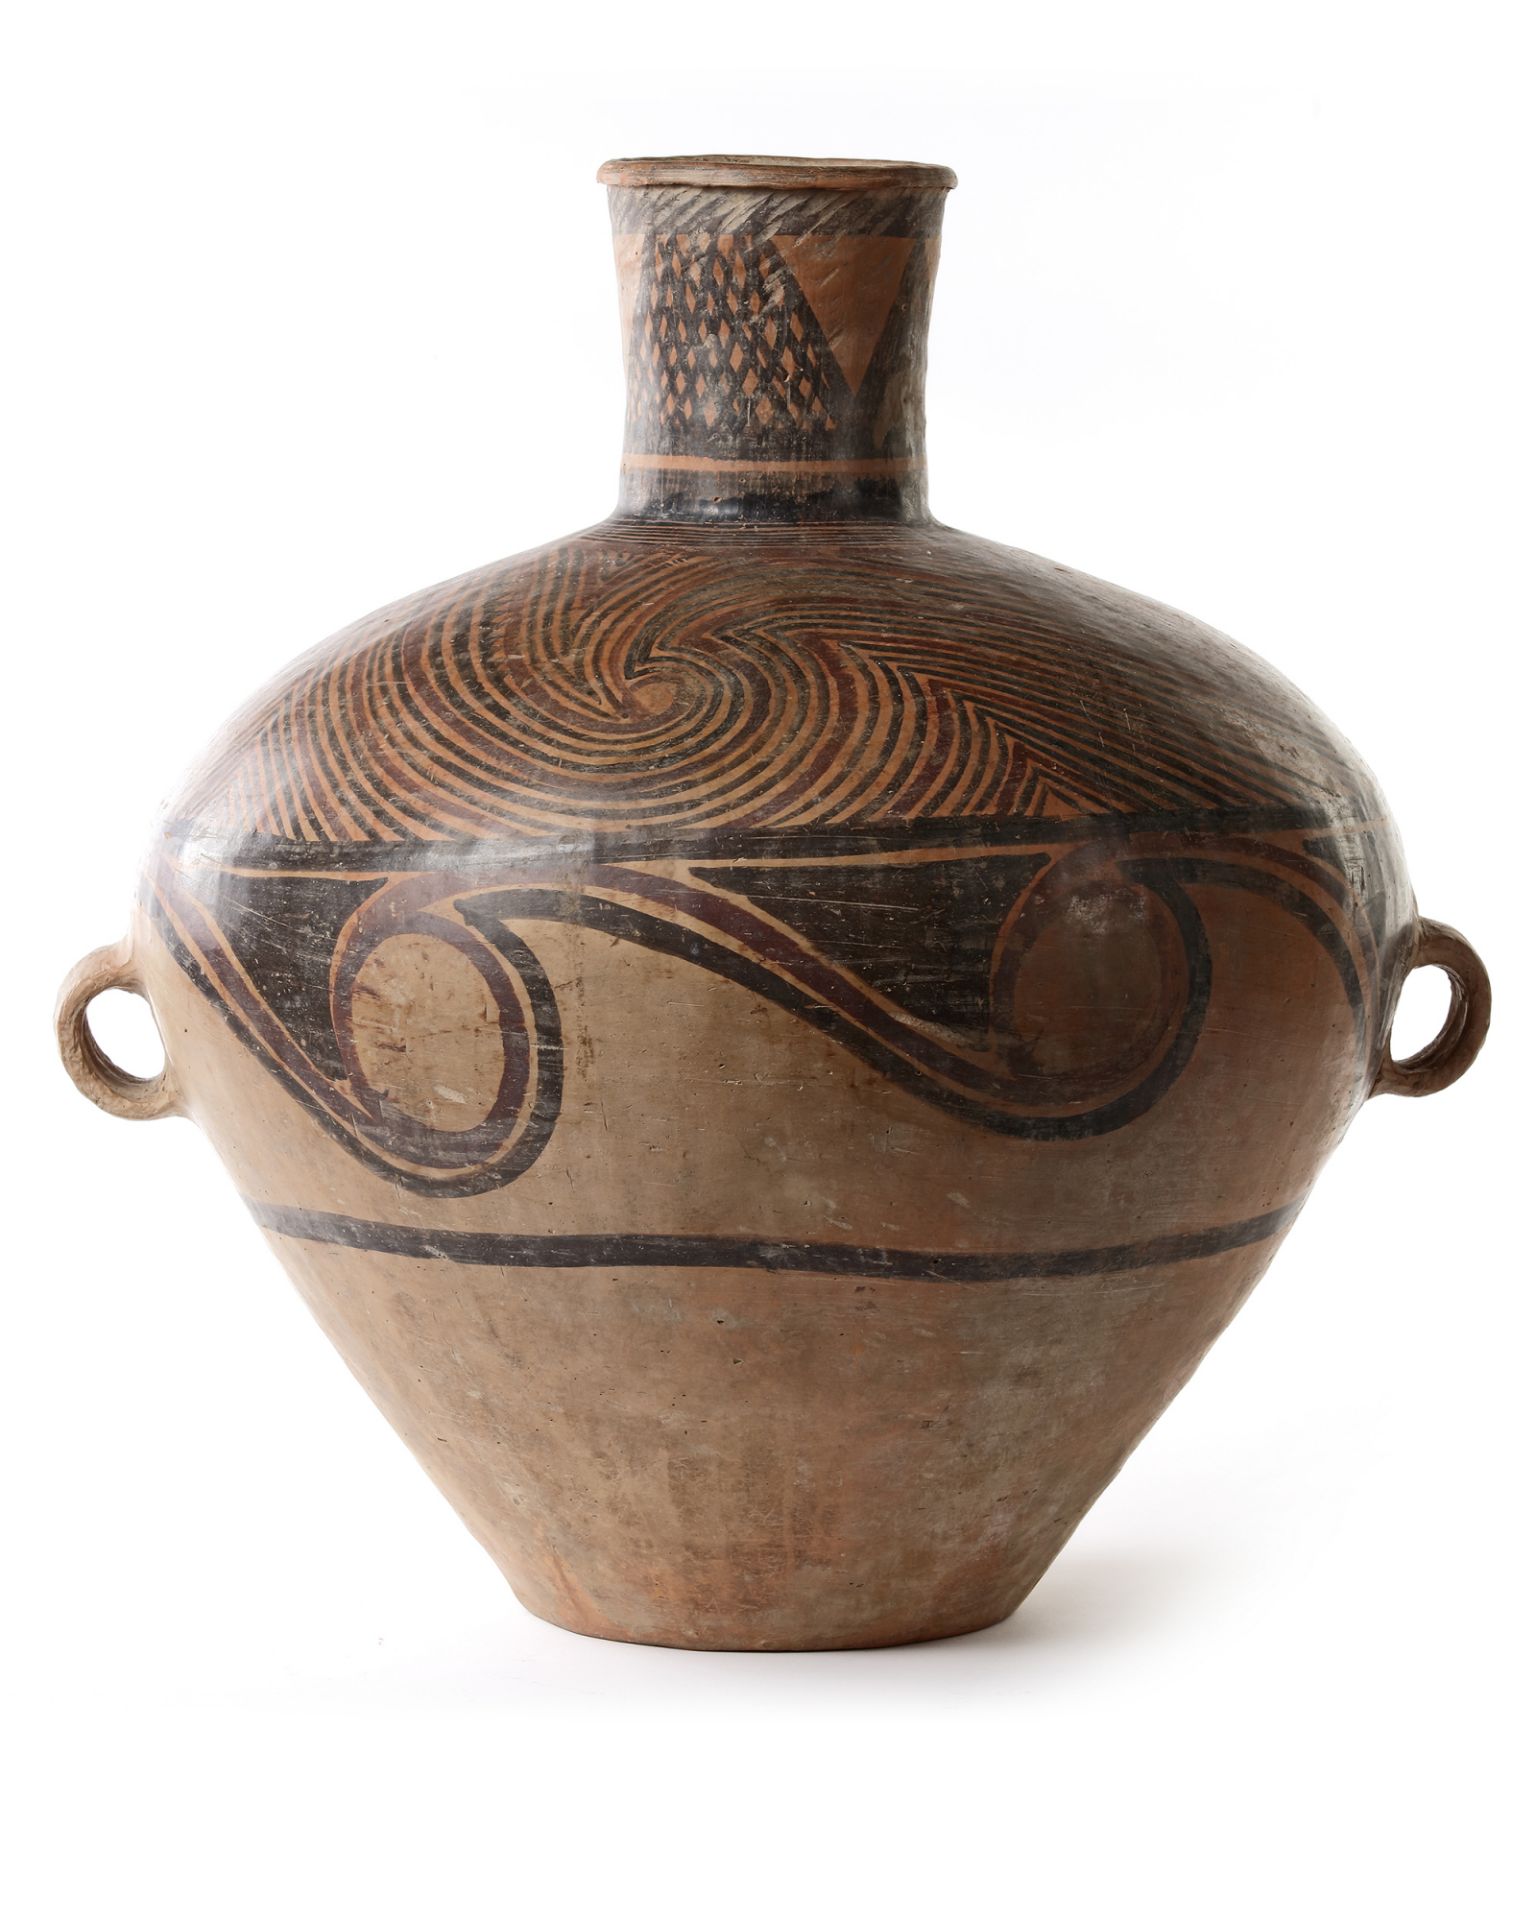 A CHINESE NEOLITHIC PAINTED POTTERY JAR, MAJIAYAO CULTURE, MID TO LATE 3RD MILLENIUM BC - Image 4 of 5